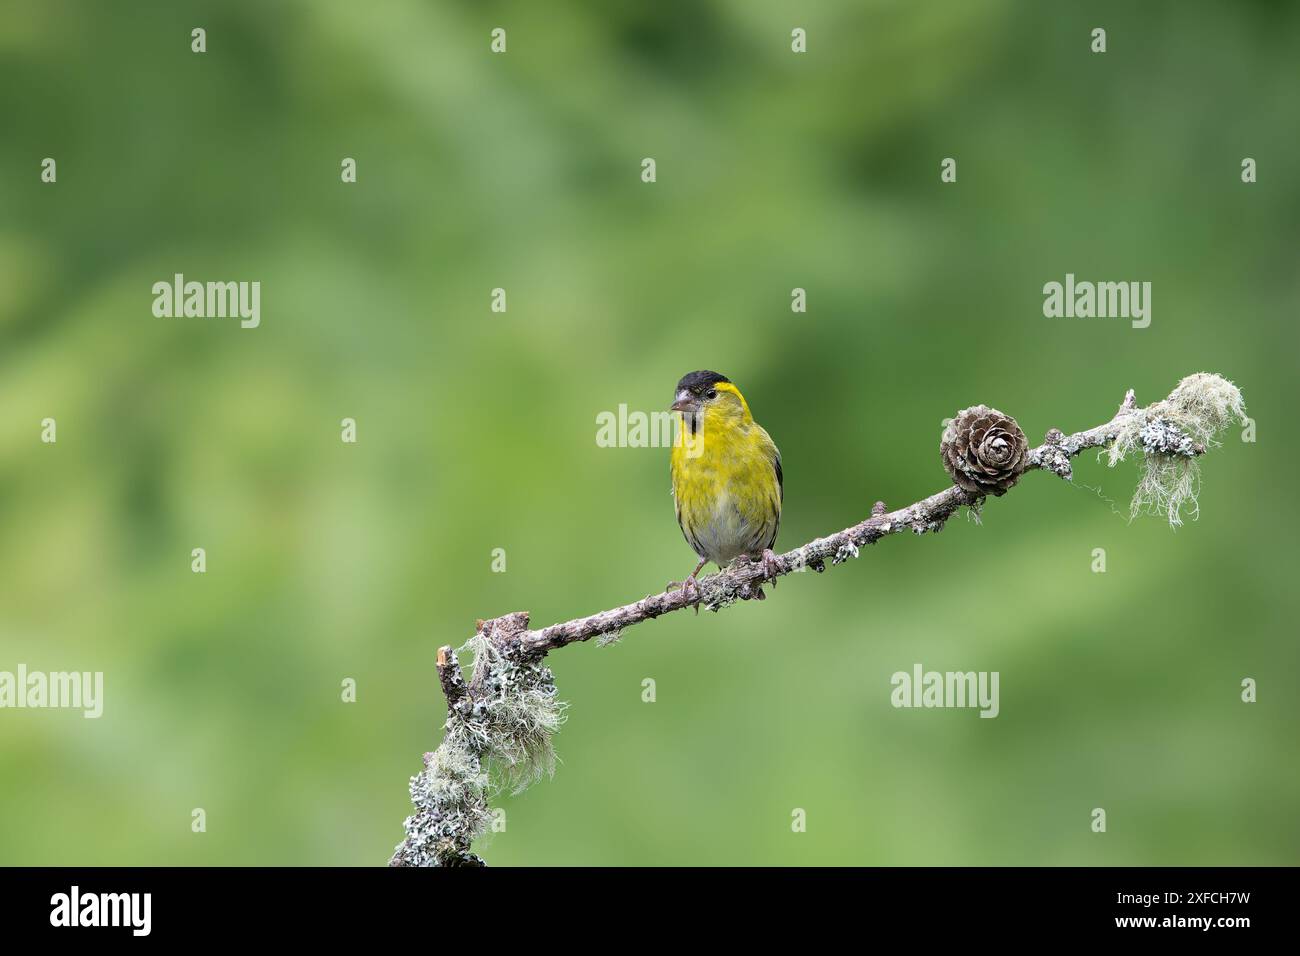 Male Siskin, Spinus spinus, perched on a lichen coverd twig Stock Photo